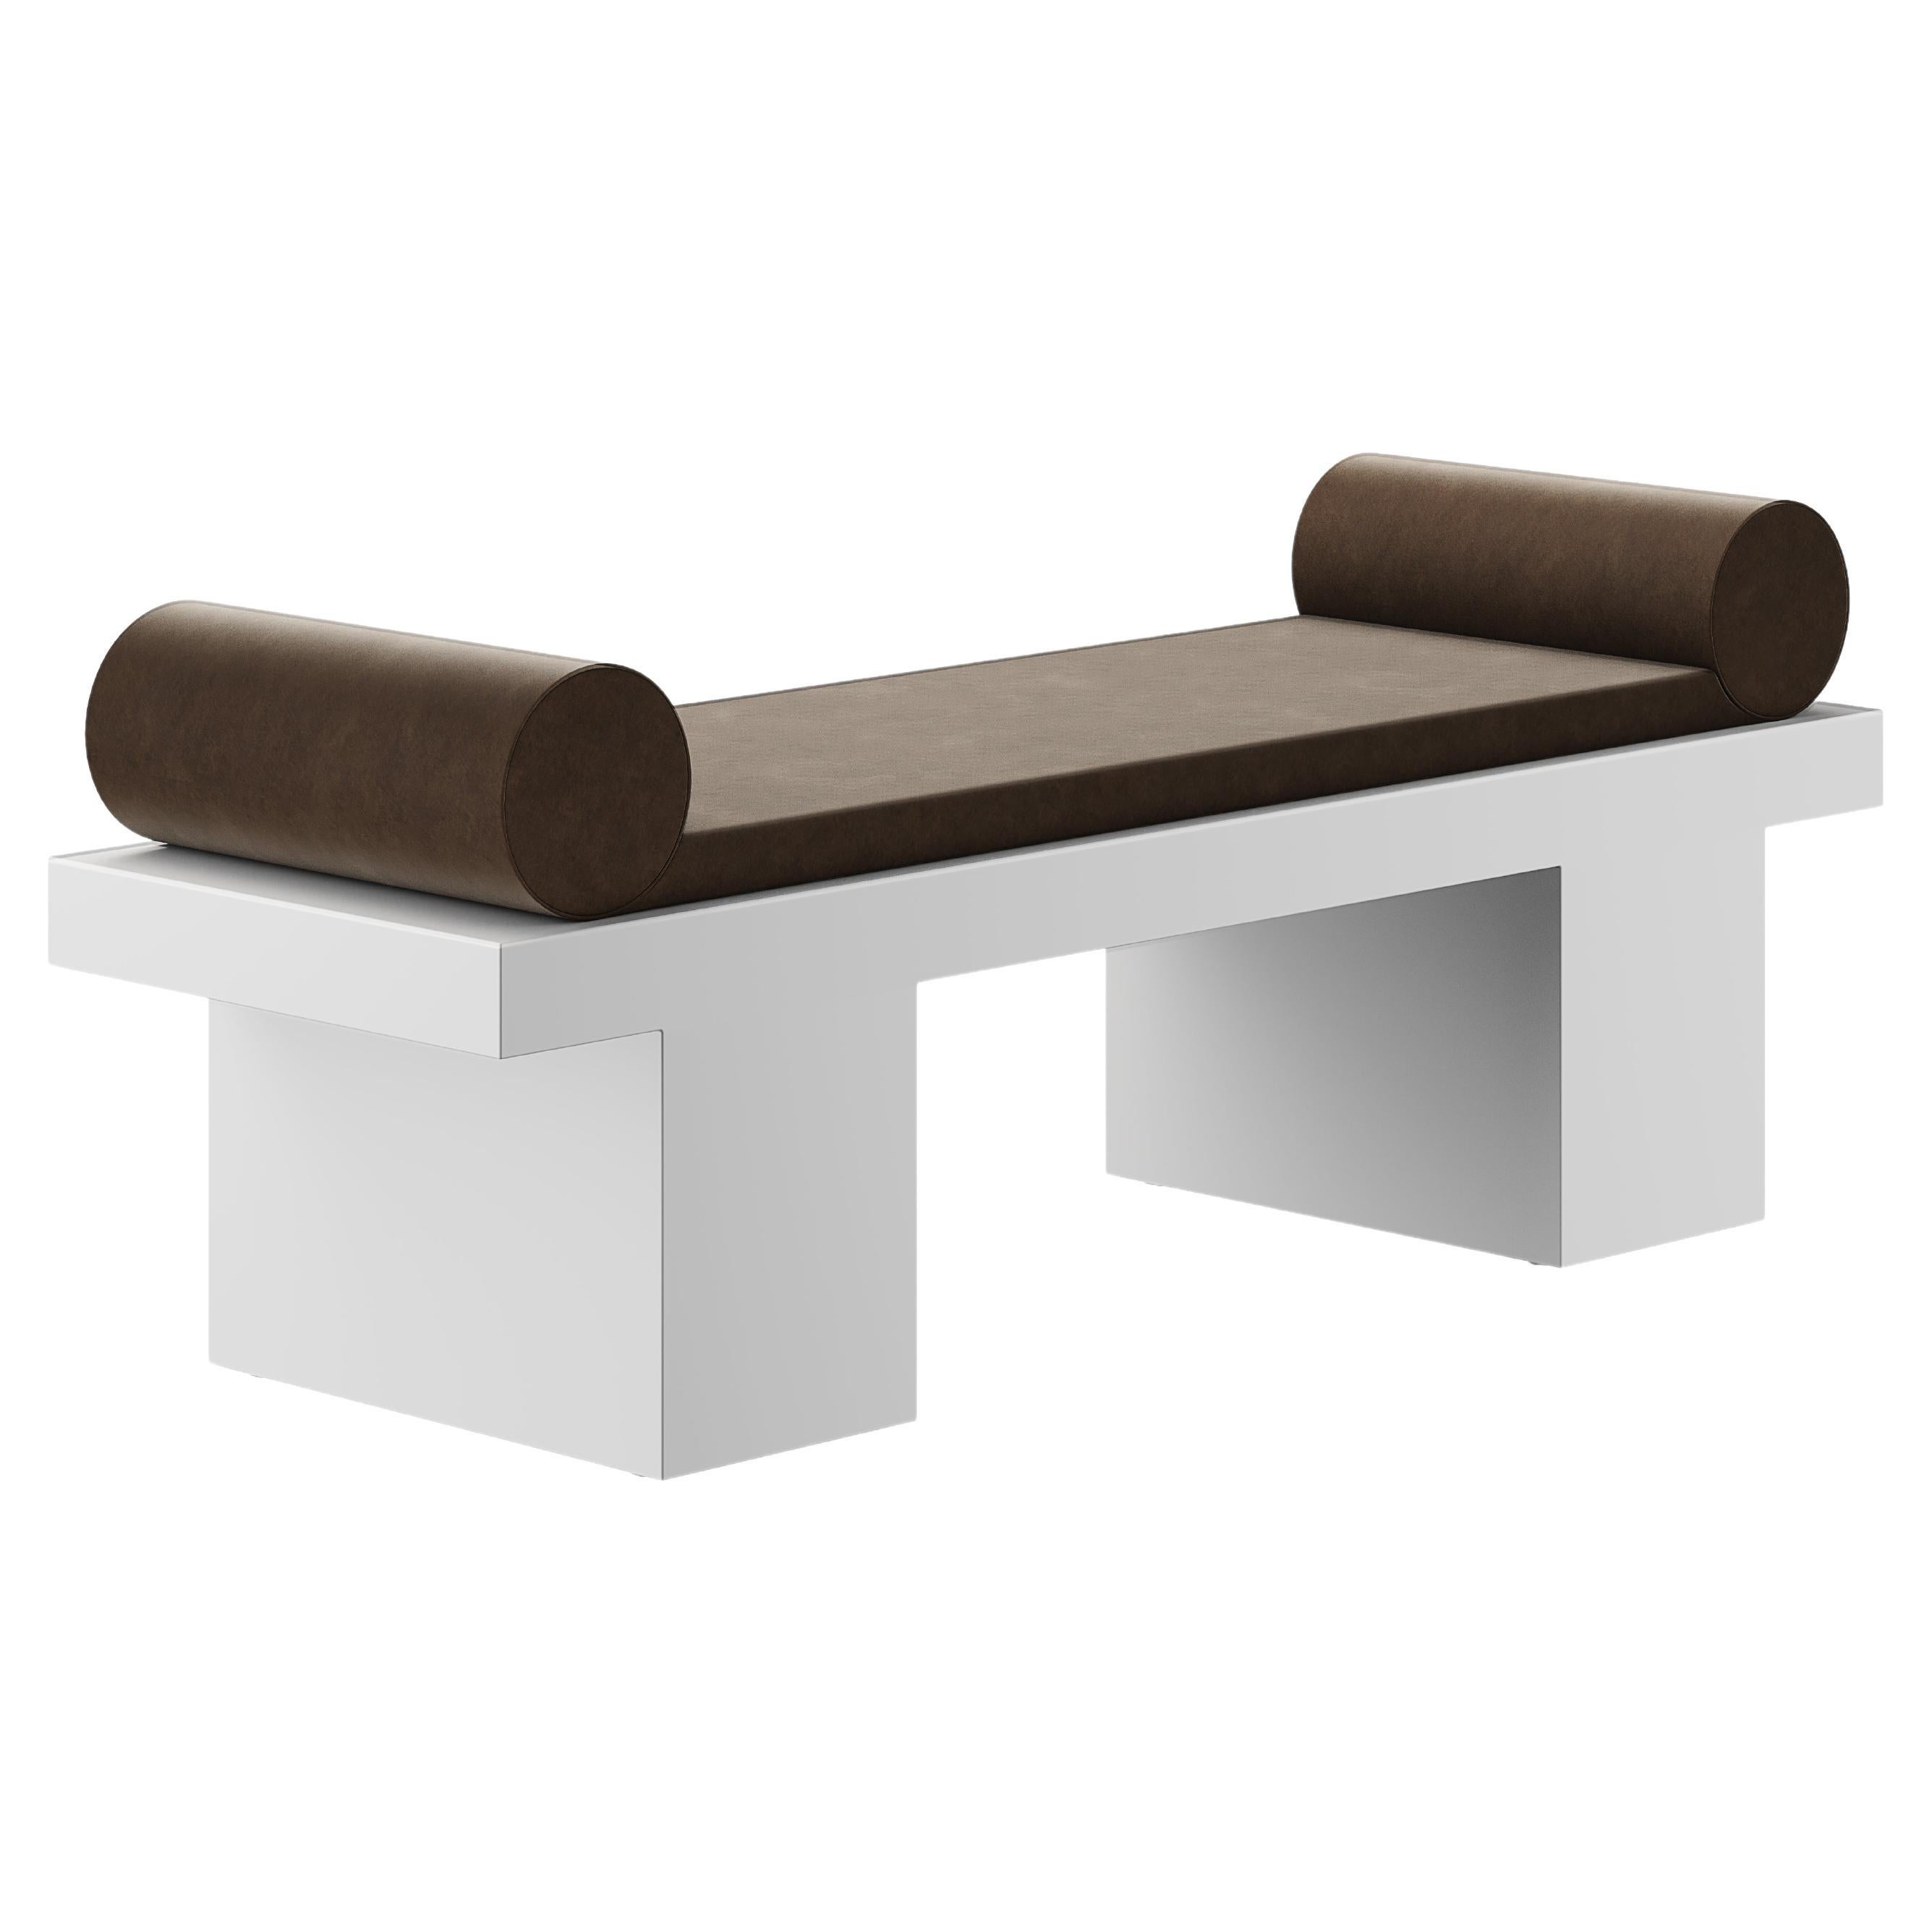 The Moderns Brutalist Style Bench Grey Matte Lacquer Upholstery in Suede Brown